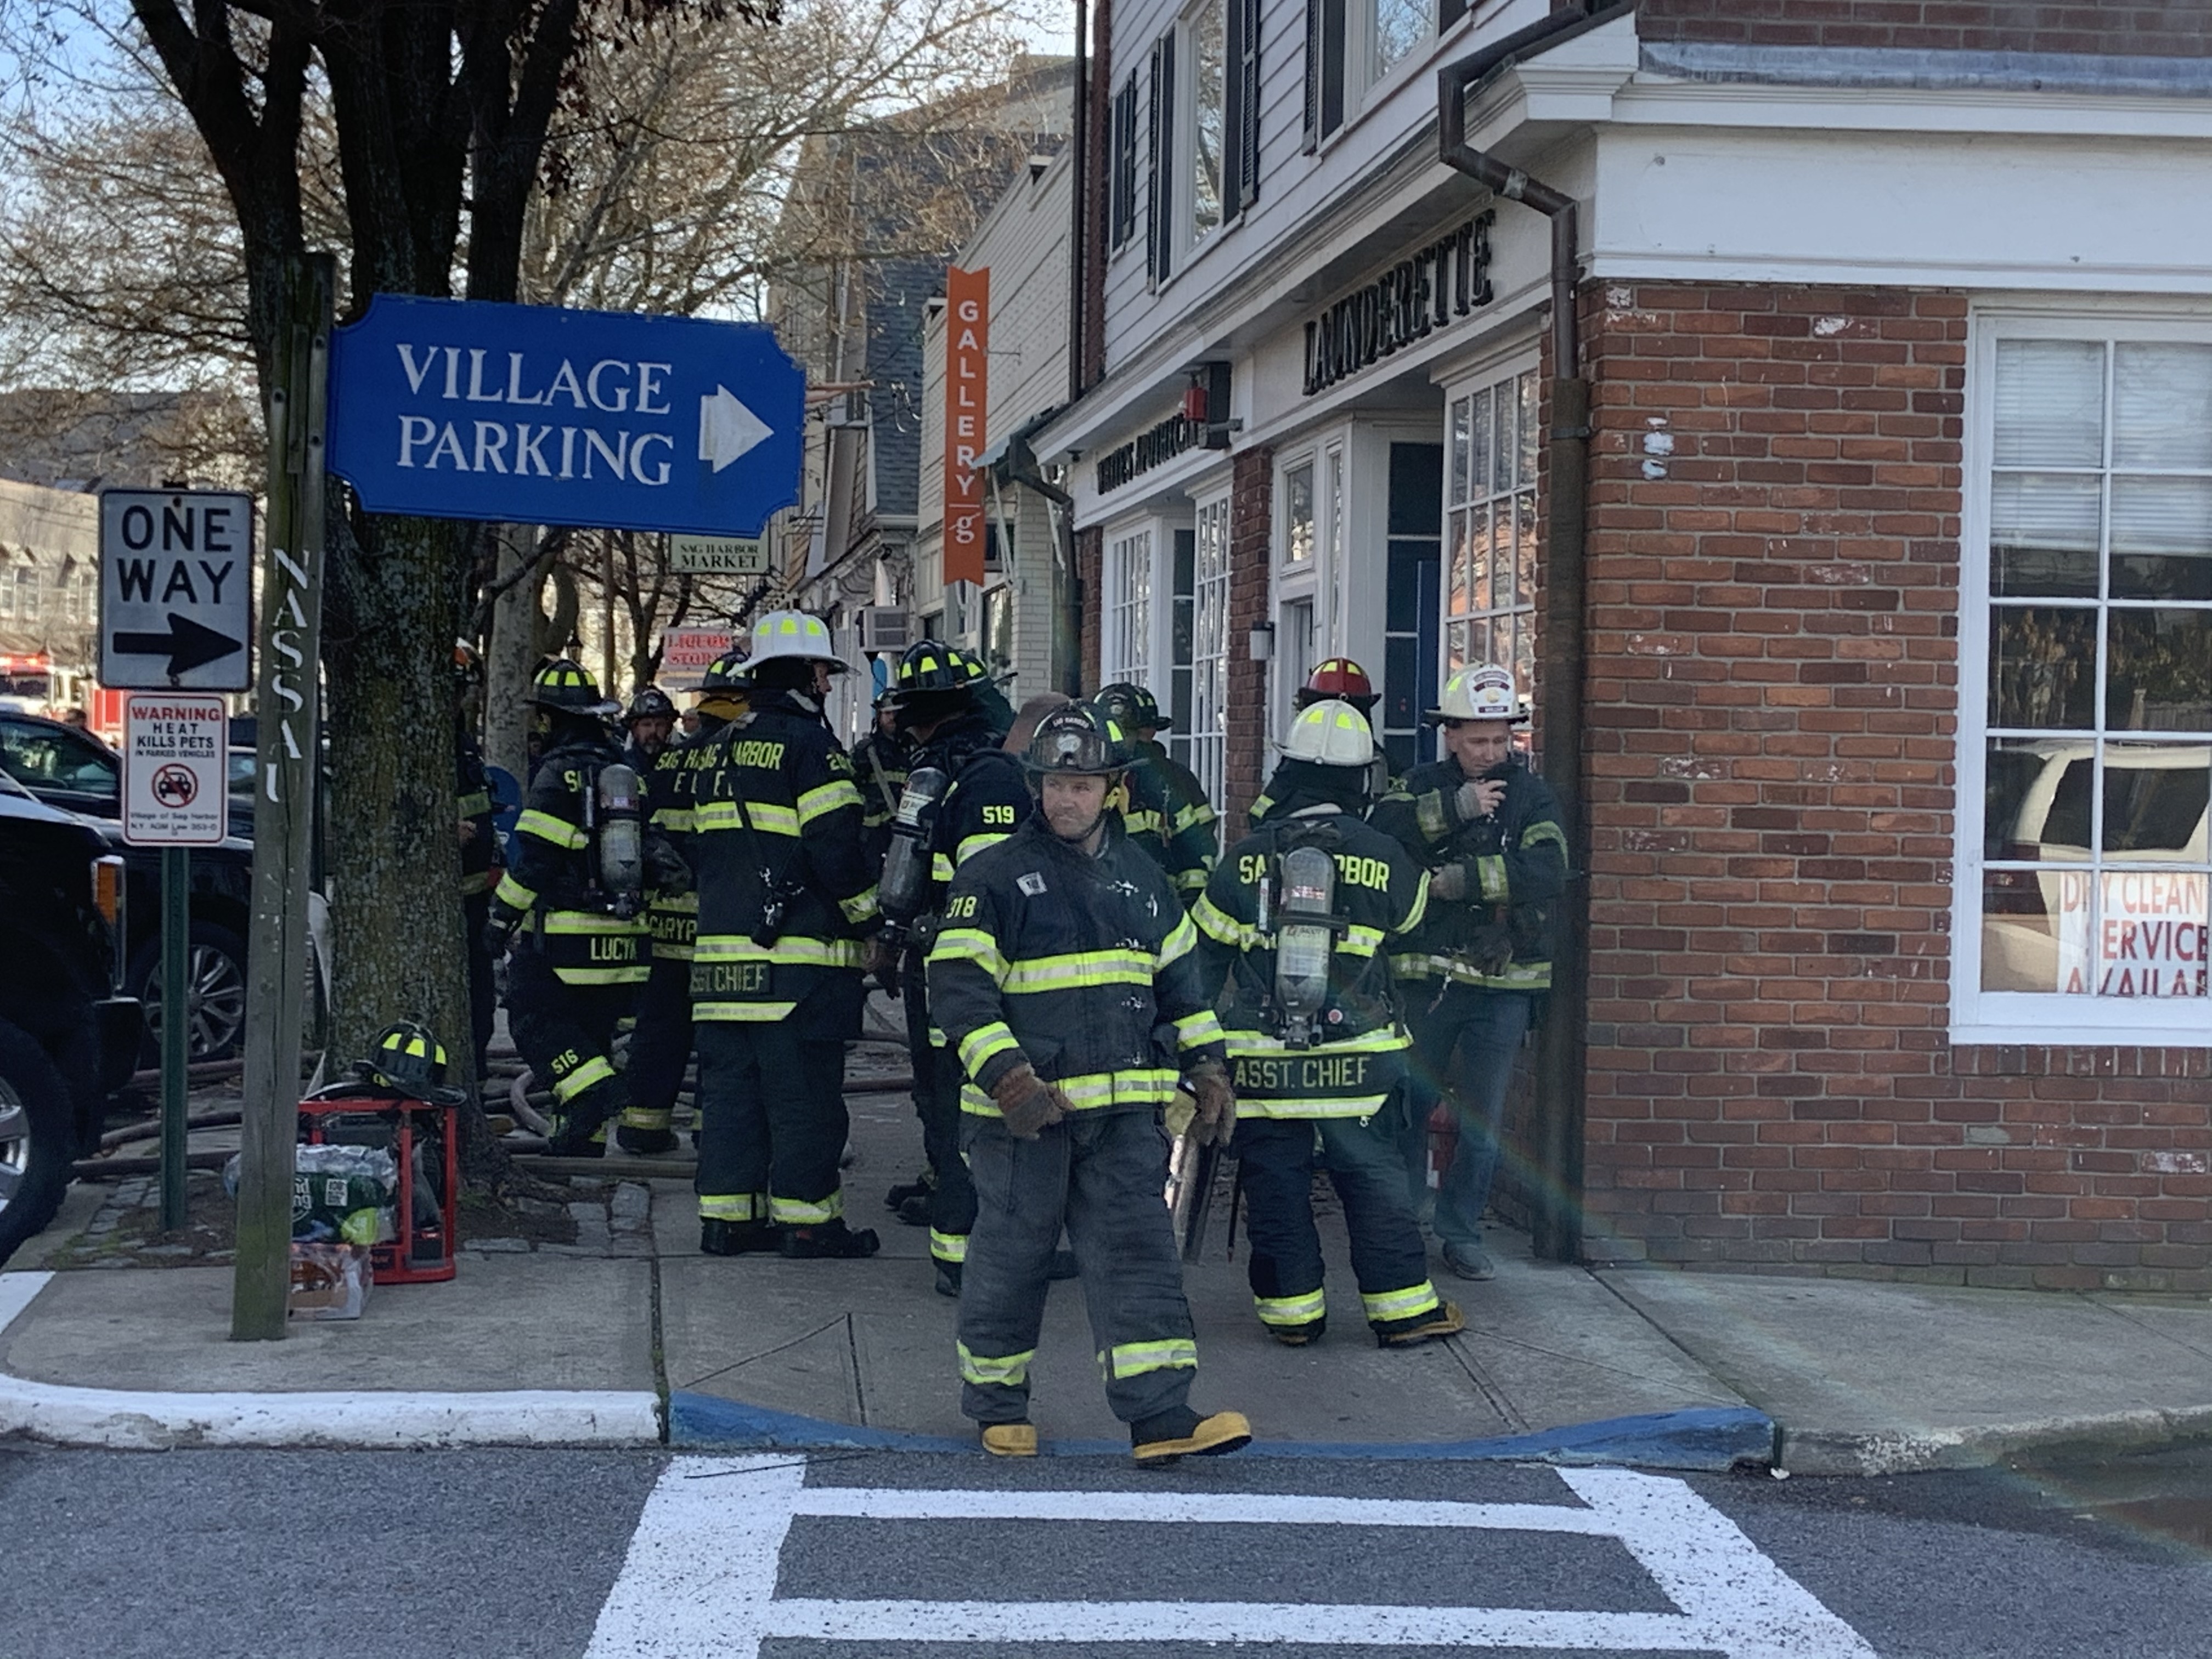 Members of the Sag Harbor Fire Department on the scene Saturday afternoon.